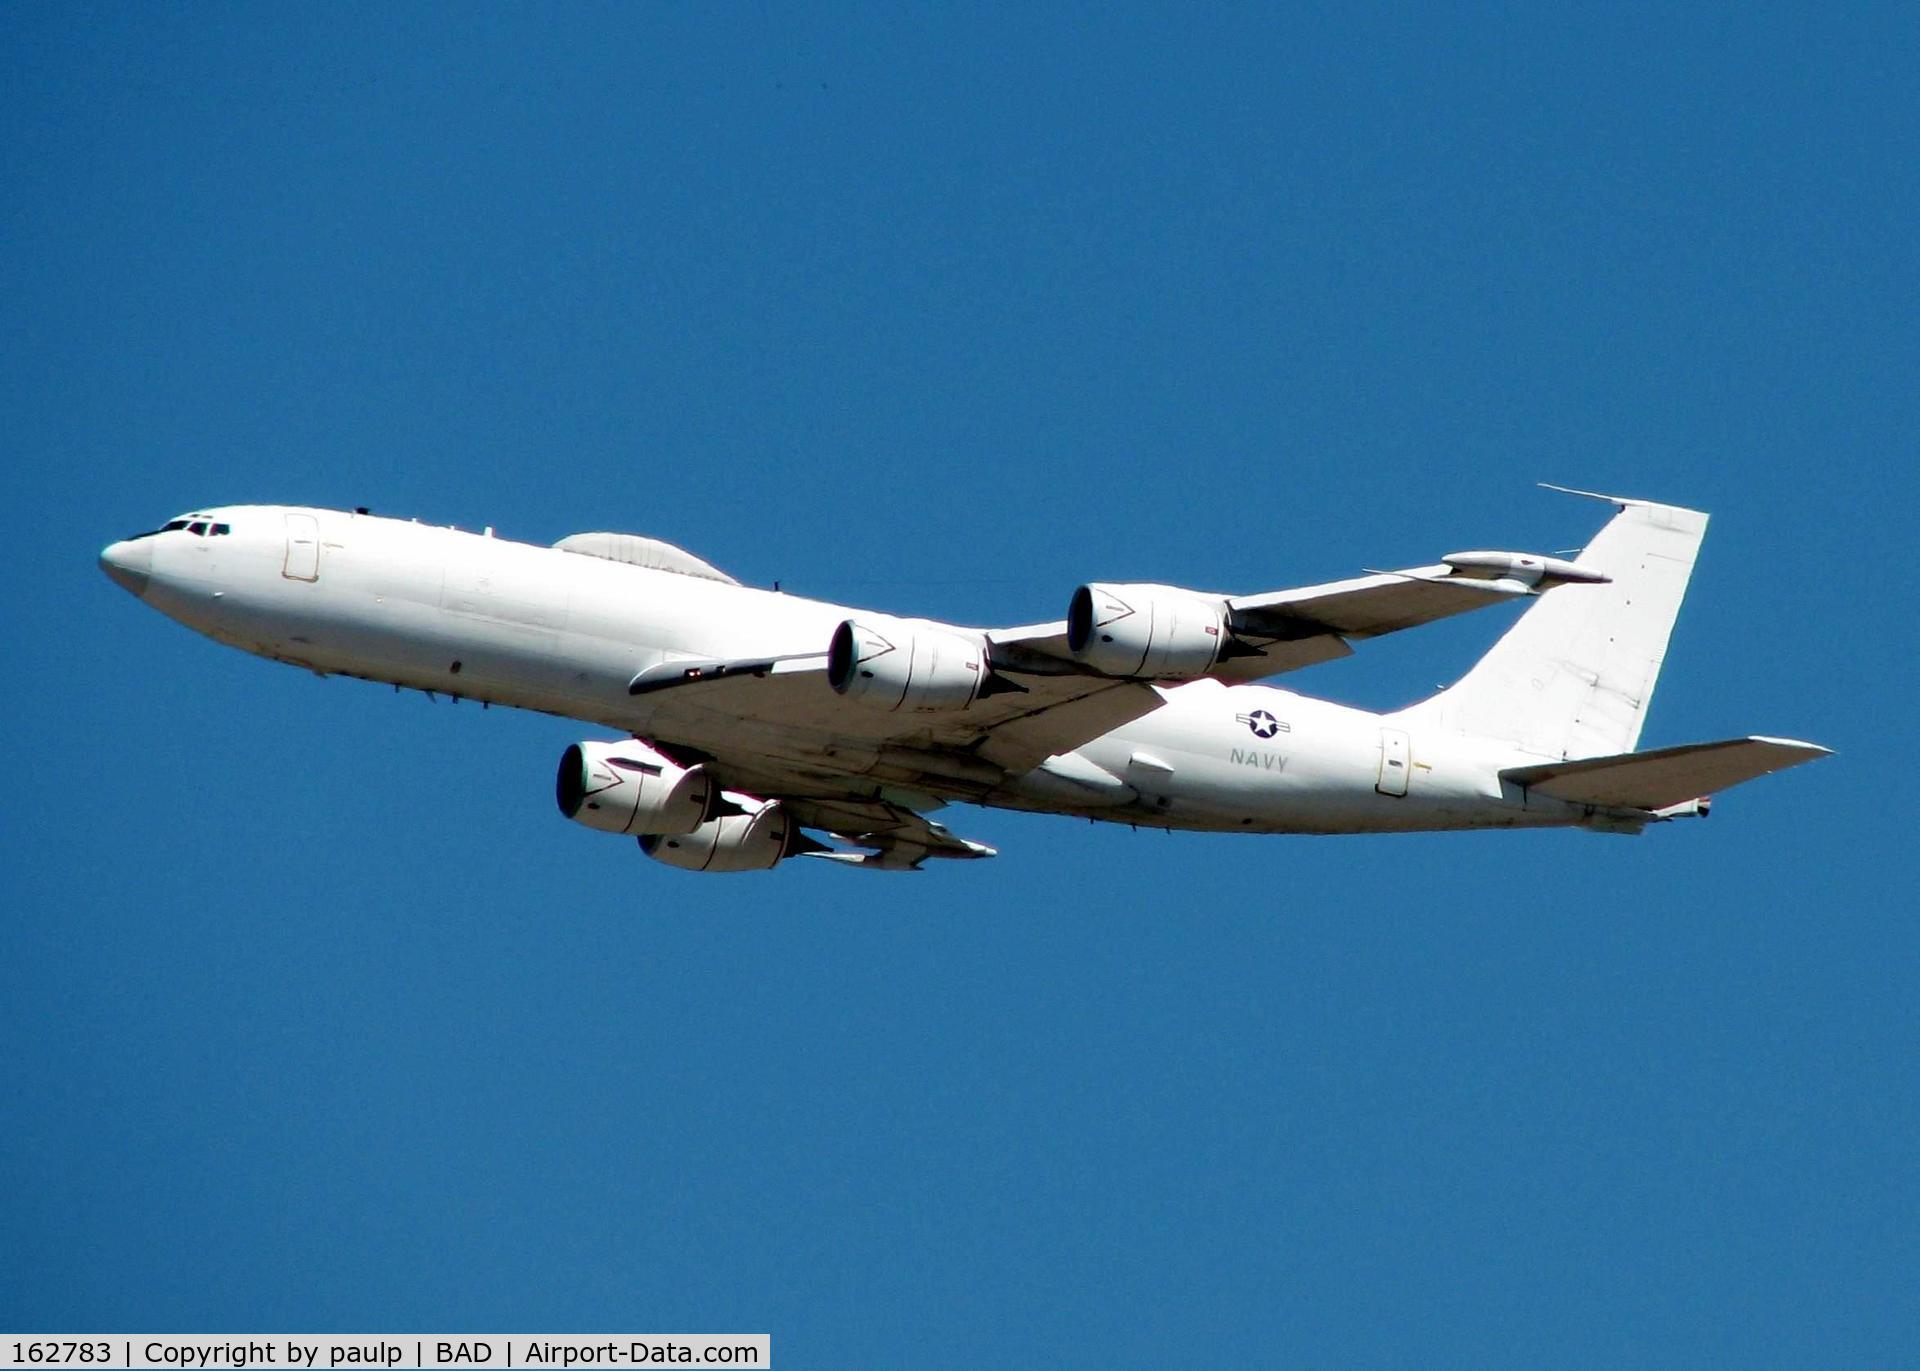 162783, 1987 Boeing E-6B Mercury C/N 23889, One of two E-6's doing touch and goes at Barksdale Air Force Base. Call sign 